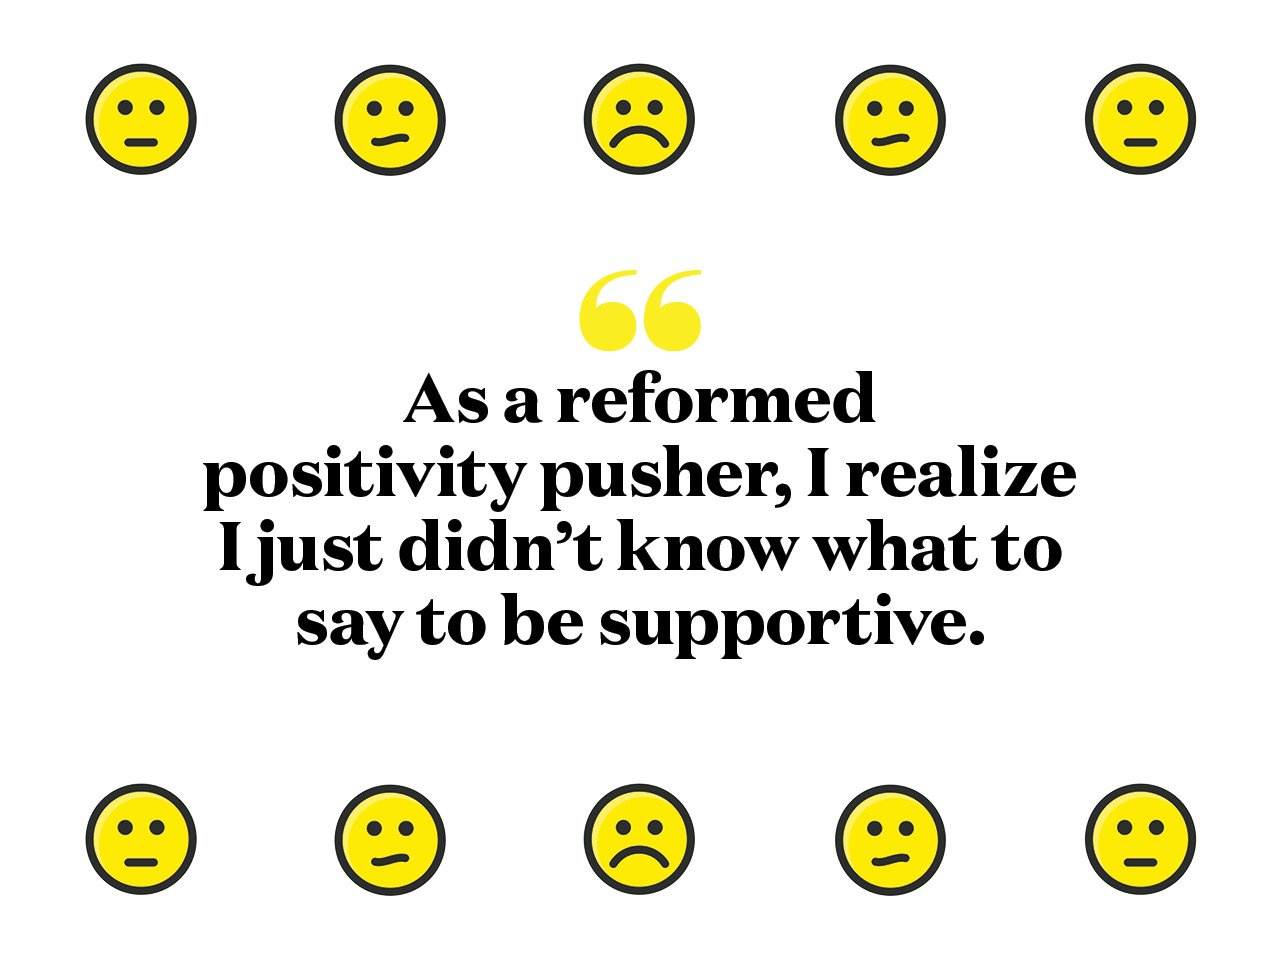 A large quote from the story:"As a reformed positivity pusher, I realized I just didn't know what to say to be supportive."